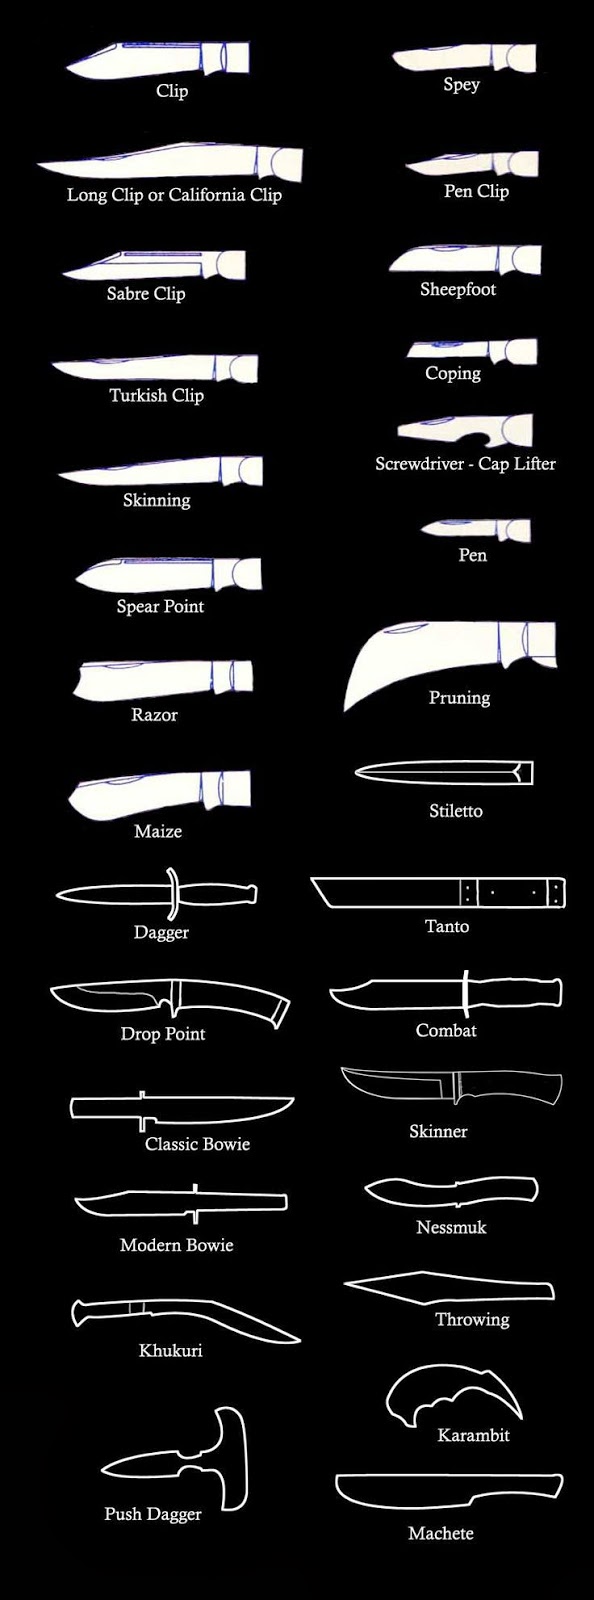 Knife and Blade Selection and Style Name Chart